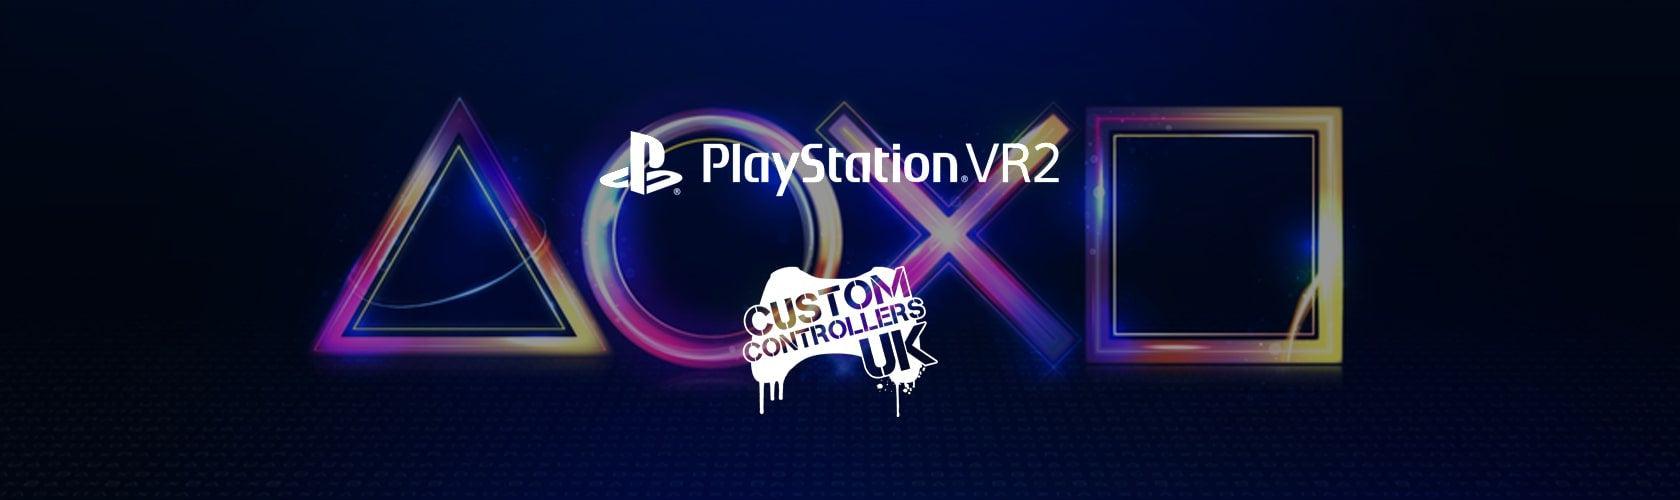 PS VR 2 Update - What We Know Now-Custom Controllers UK